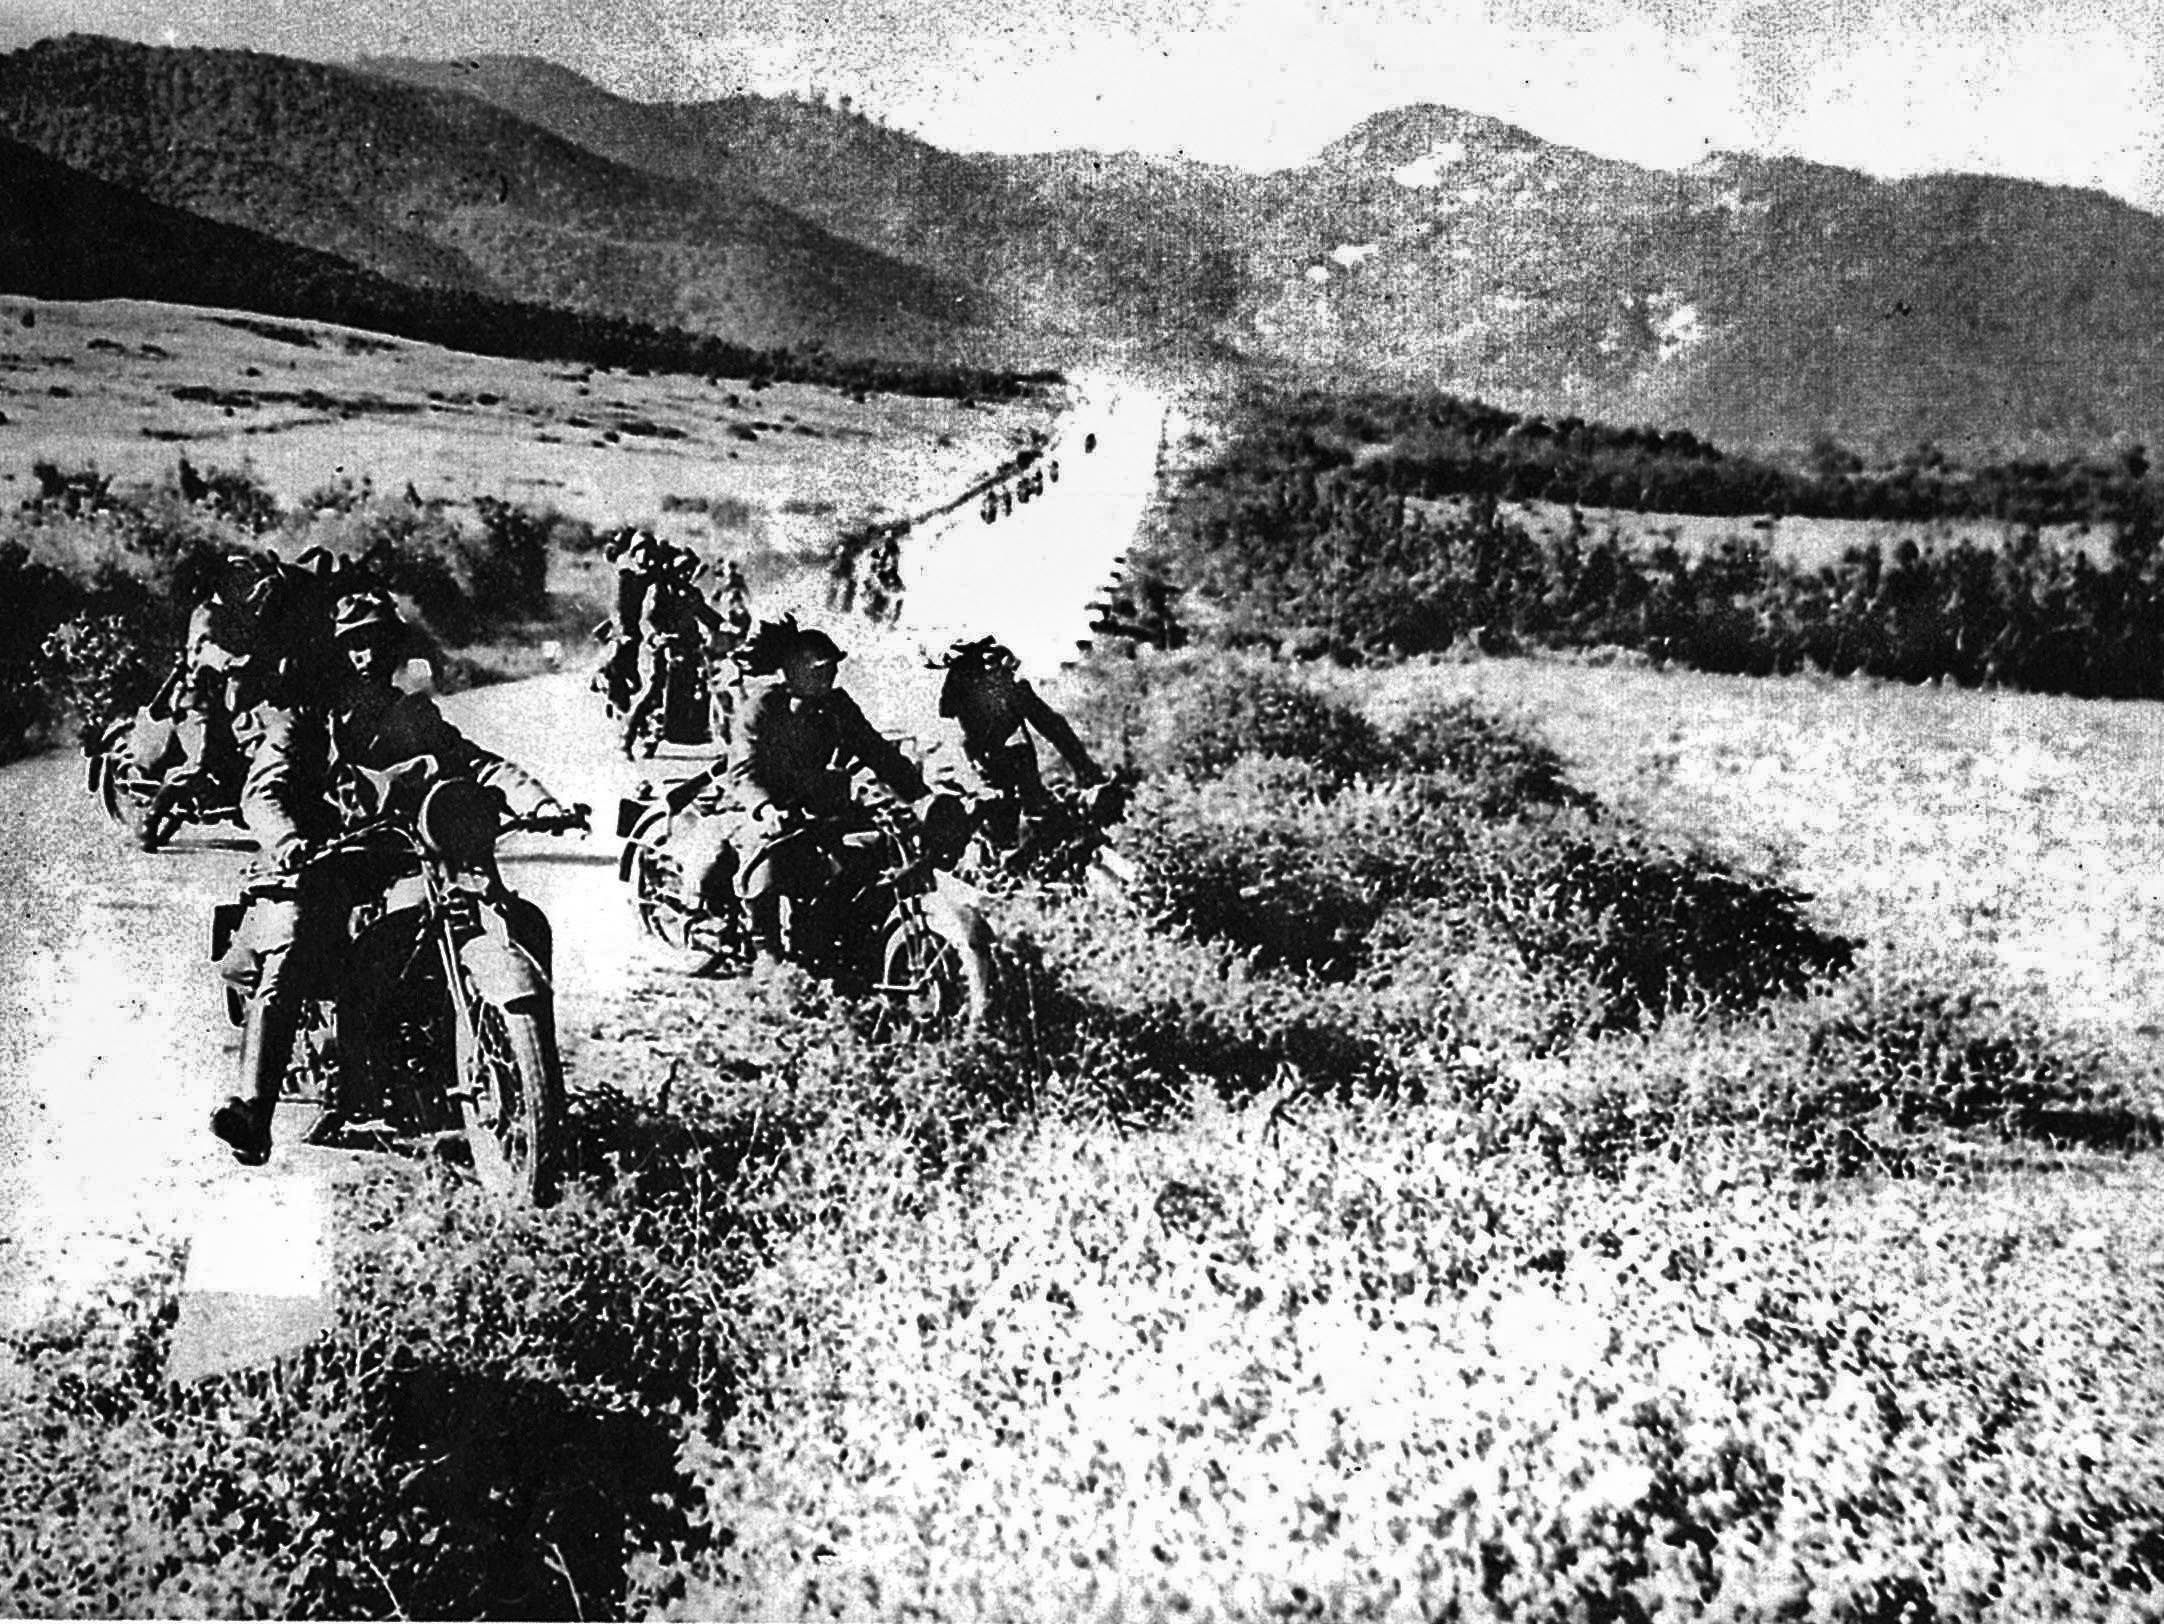 An elite force of motorcycle-mounted Italian Bersagliari troops, identifiable by the feathers from black capons on their sun helmets, roll into northern Greece. Poorly led, the Italians met stiff resistance just inside Greece’s border. 